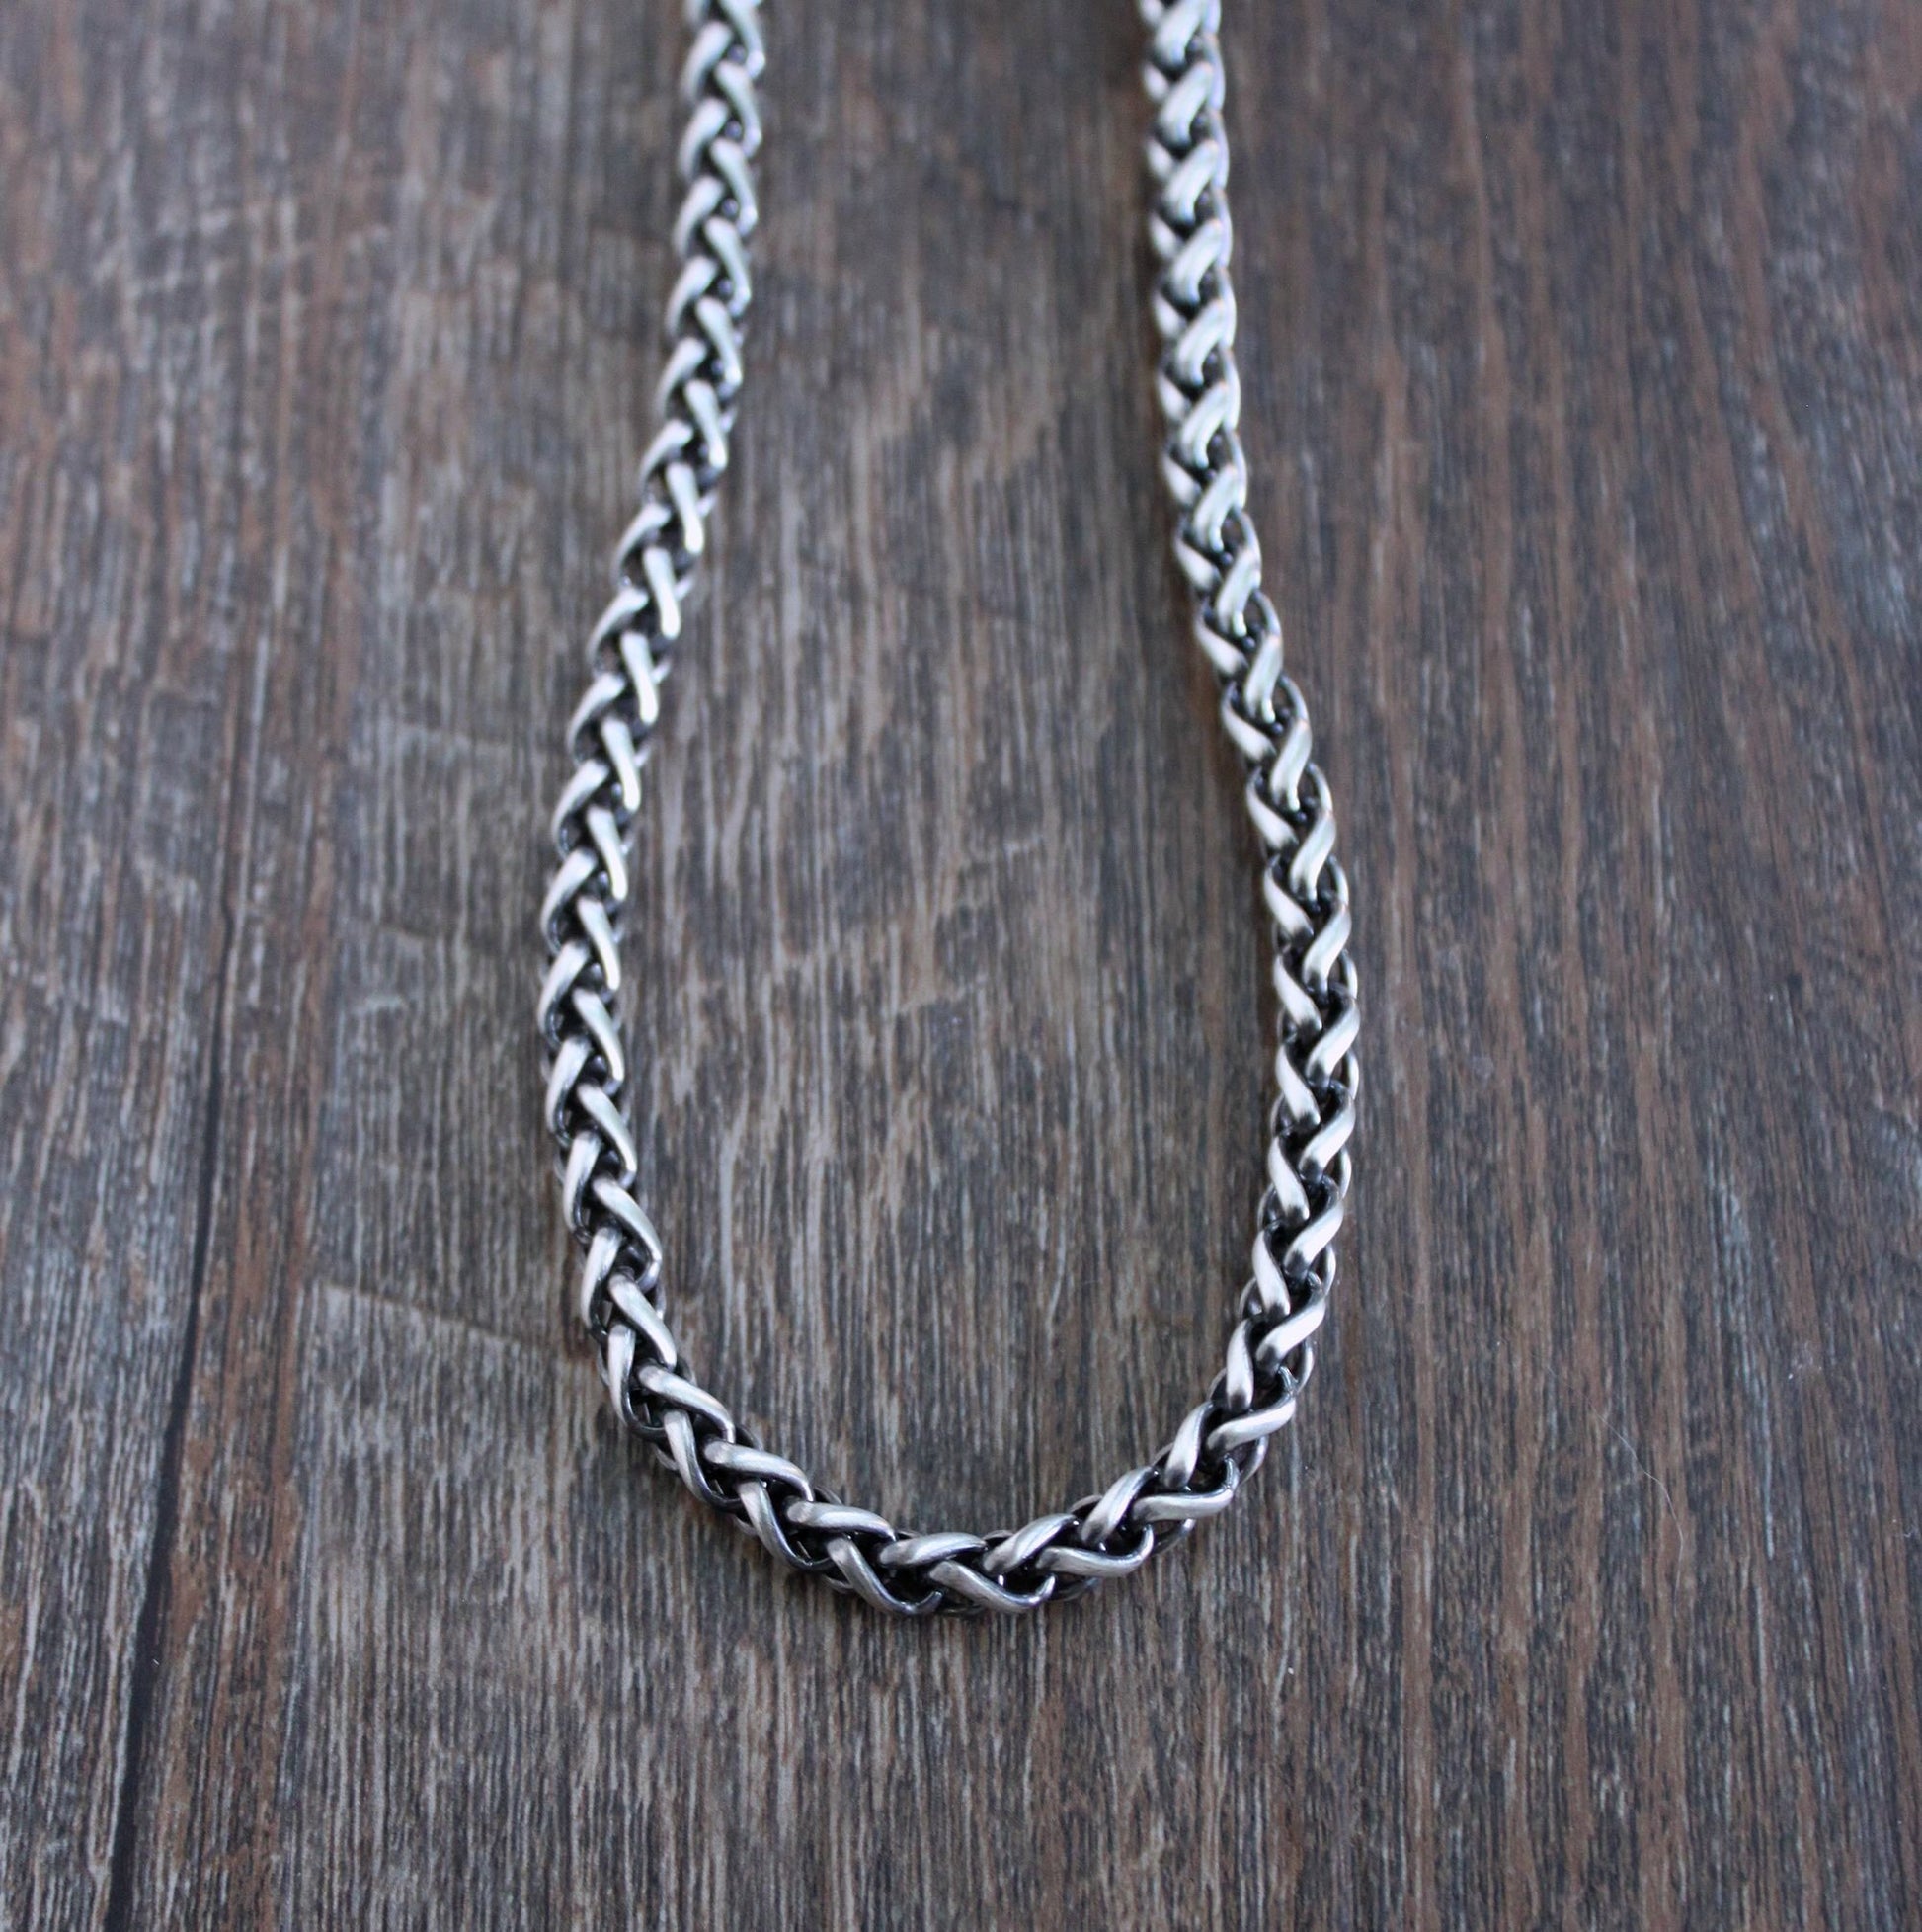 Silver Chain Necklace - Wheat 5mm 50cm